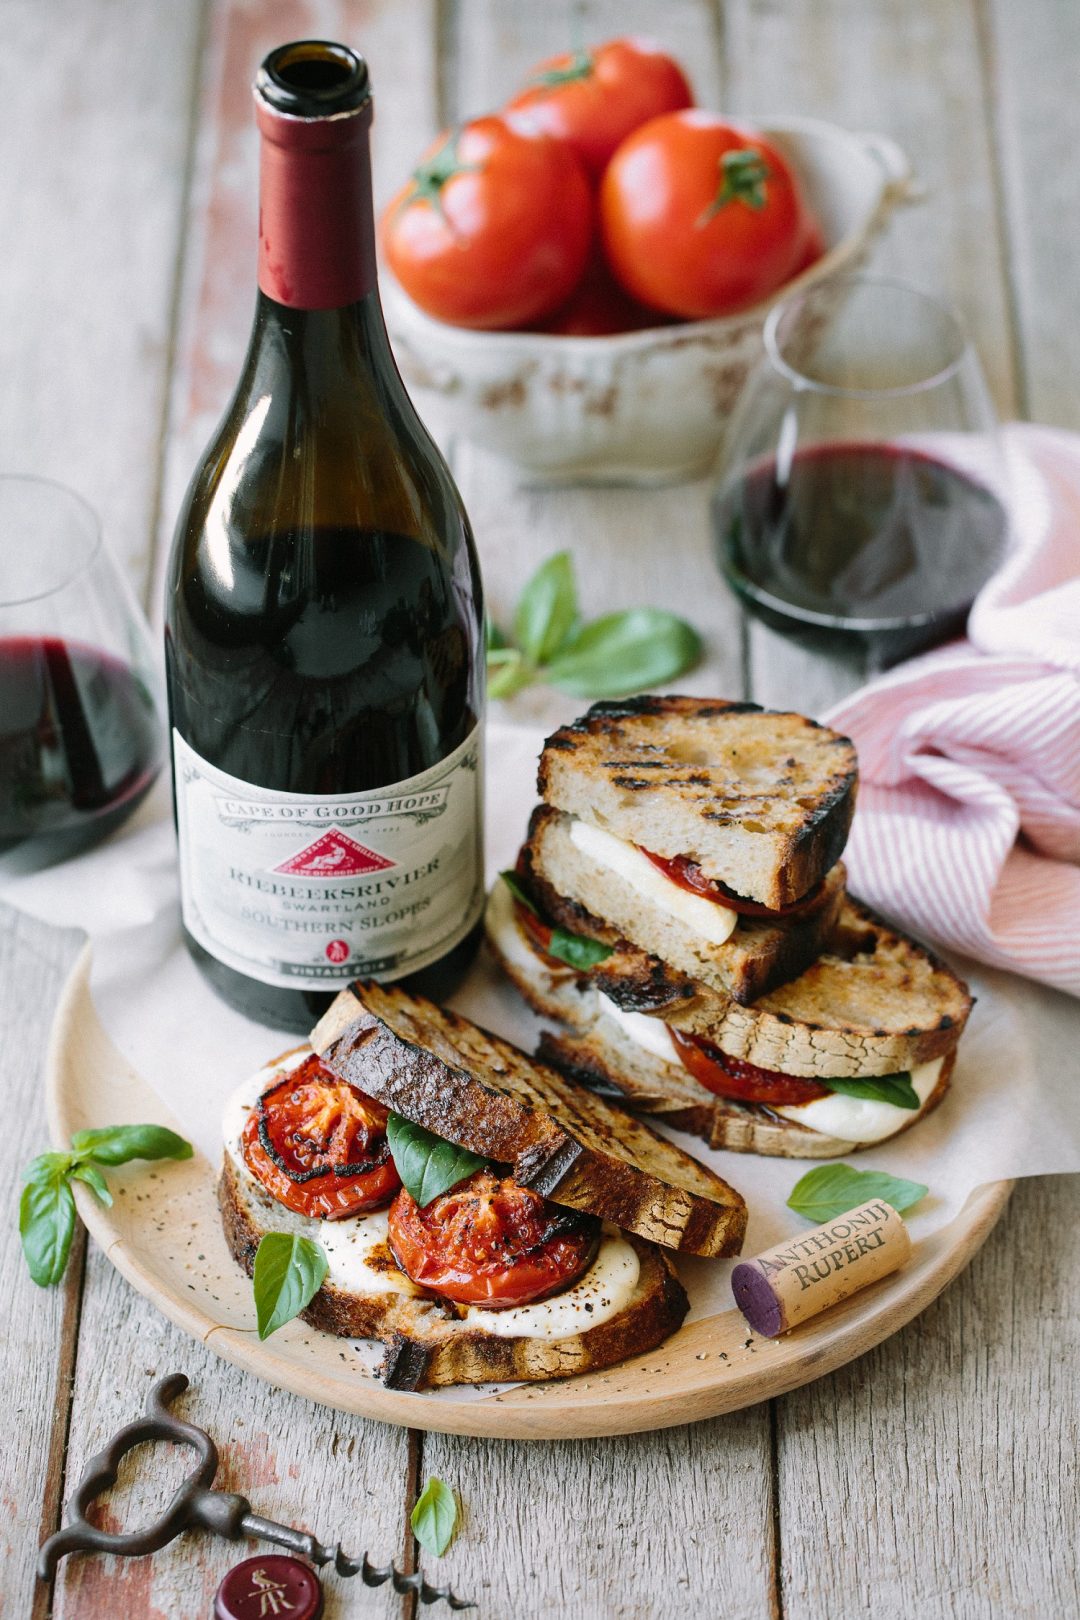 Balsamic-roasted tomato braaibroodjies with fior di latte and basil paired with Cape of Good Hope Riebeeksrivier Southern Slopes